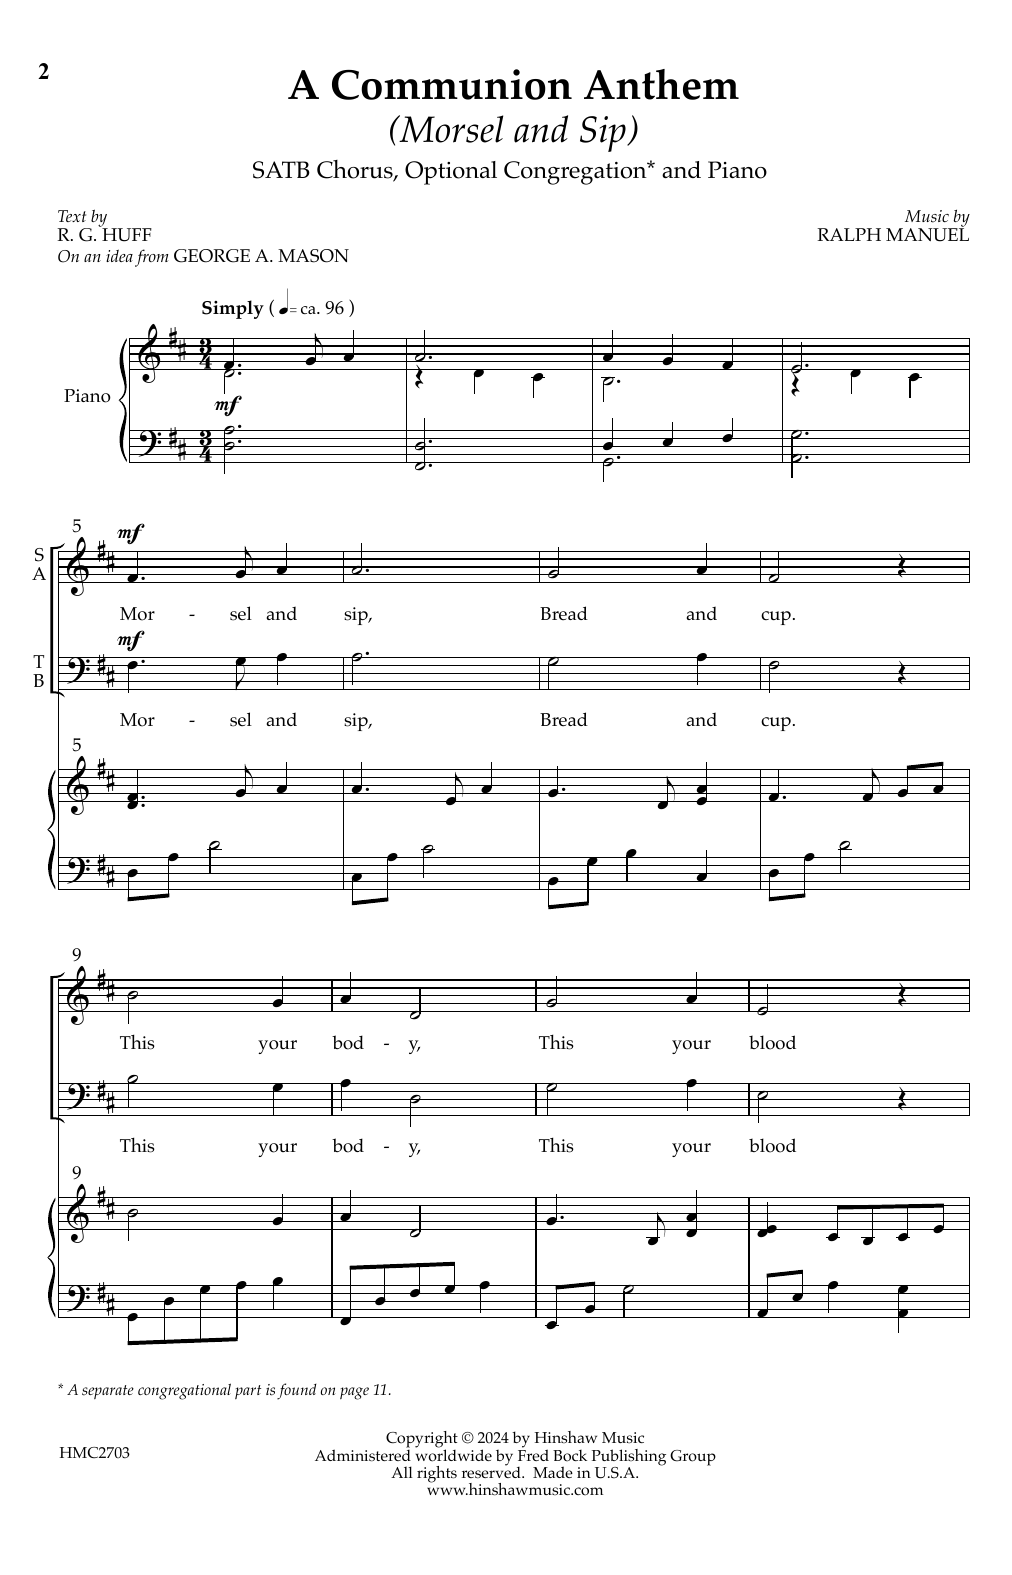 Download Ralph Manuel A Communion Anthem (Morsel and Sip) Sheet Music